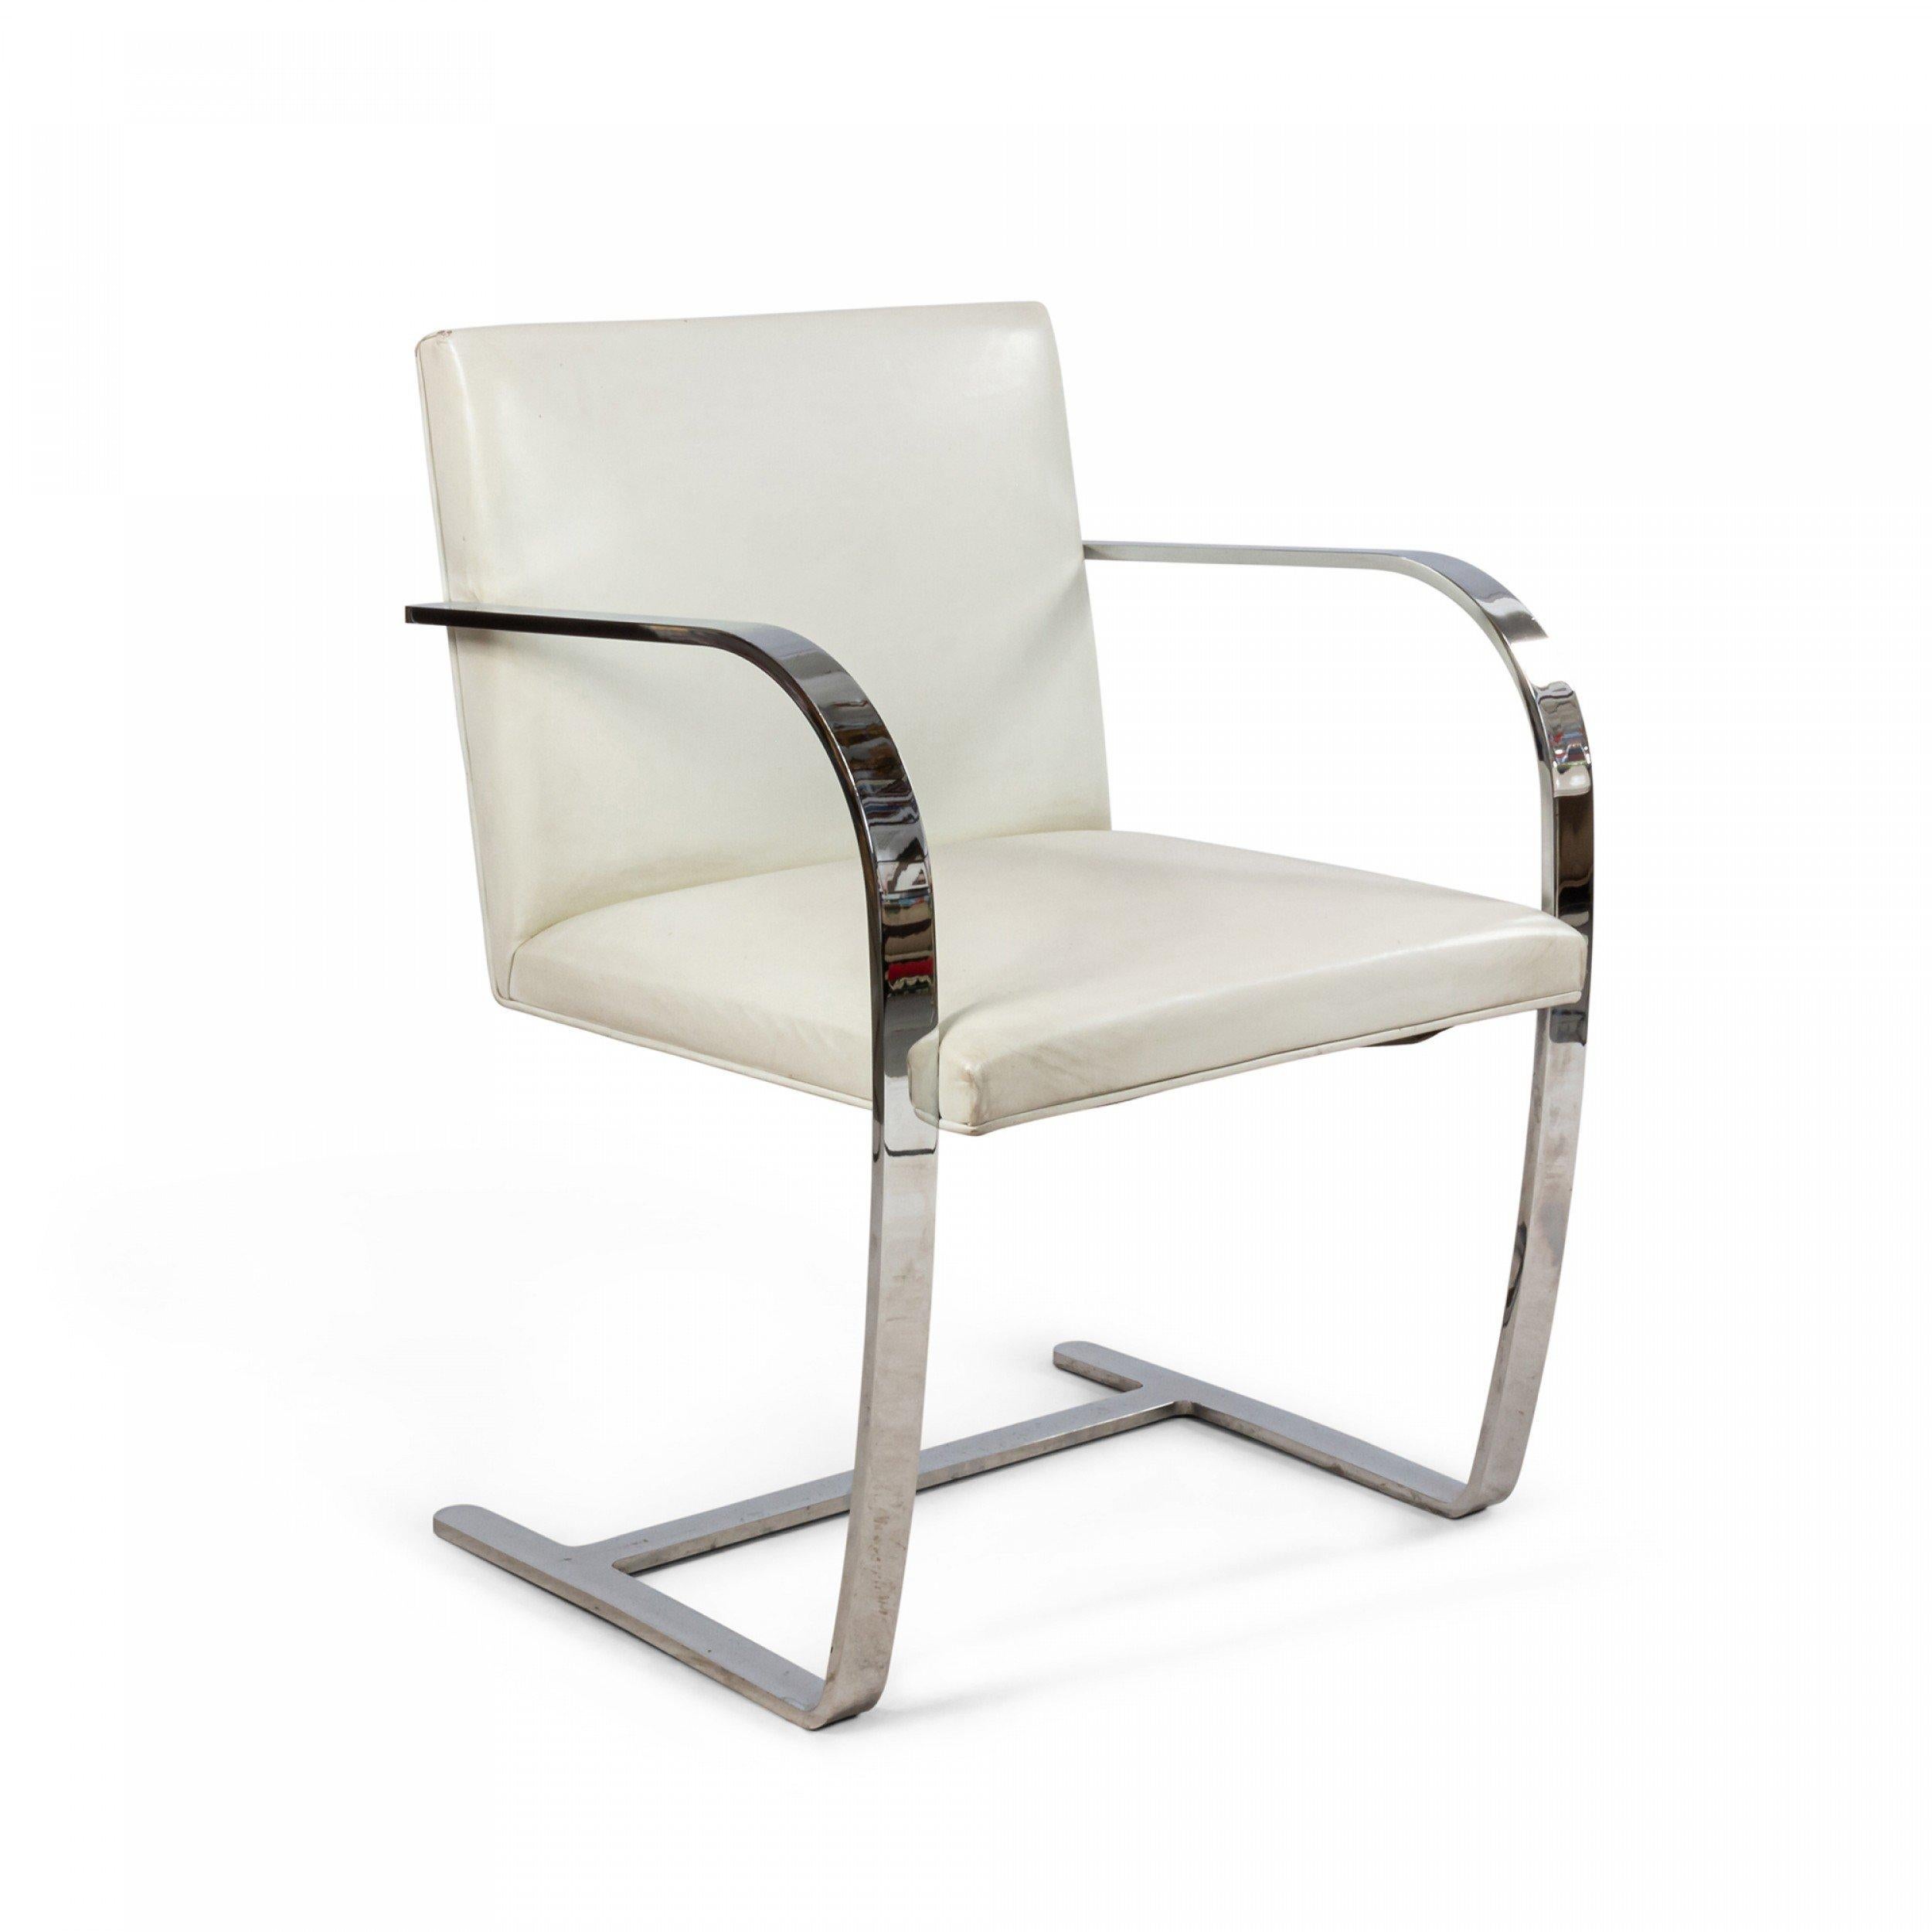 Set of 4 chrome Brno chairs with white leather upholstery (MIES VAN DER ROHE FOR Knoll) (PRICED AS SET).
 